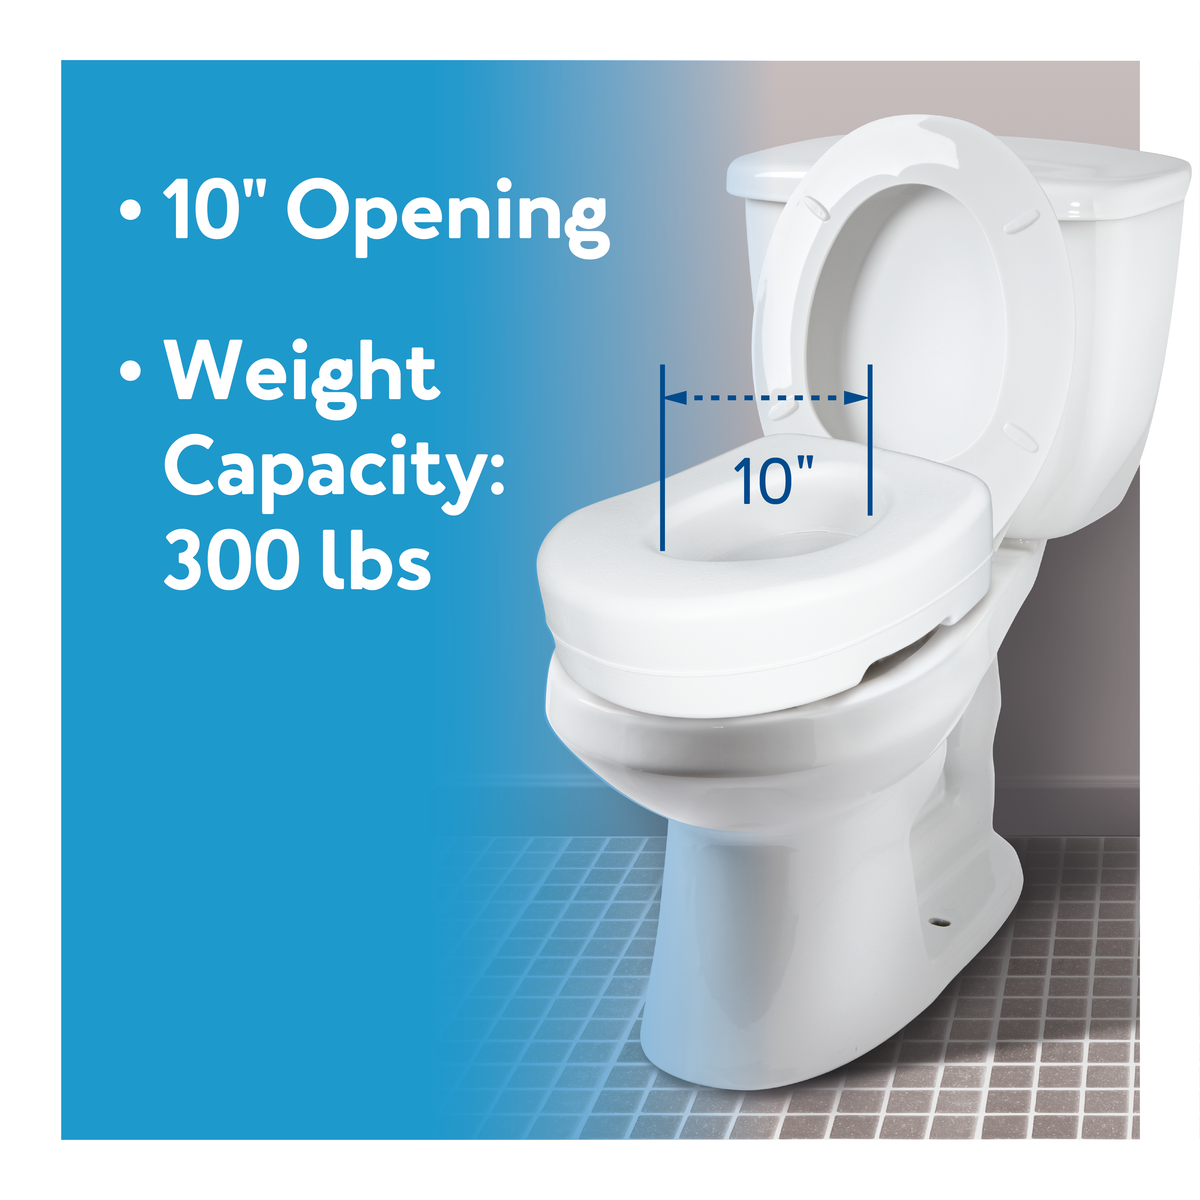 The Carex Raised Toilet Seat with text showing 10” opening and 300 lbs weight capacity